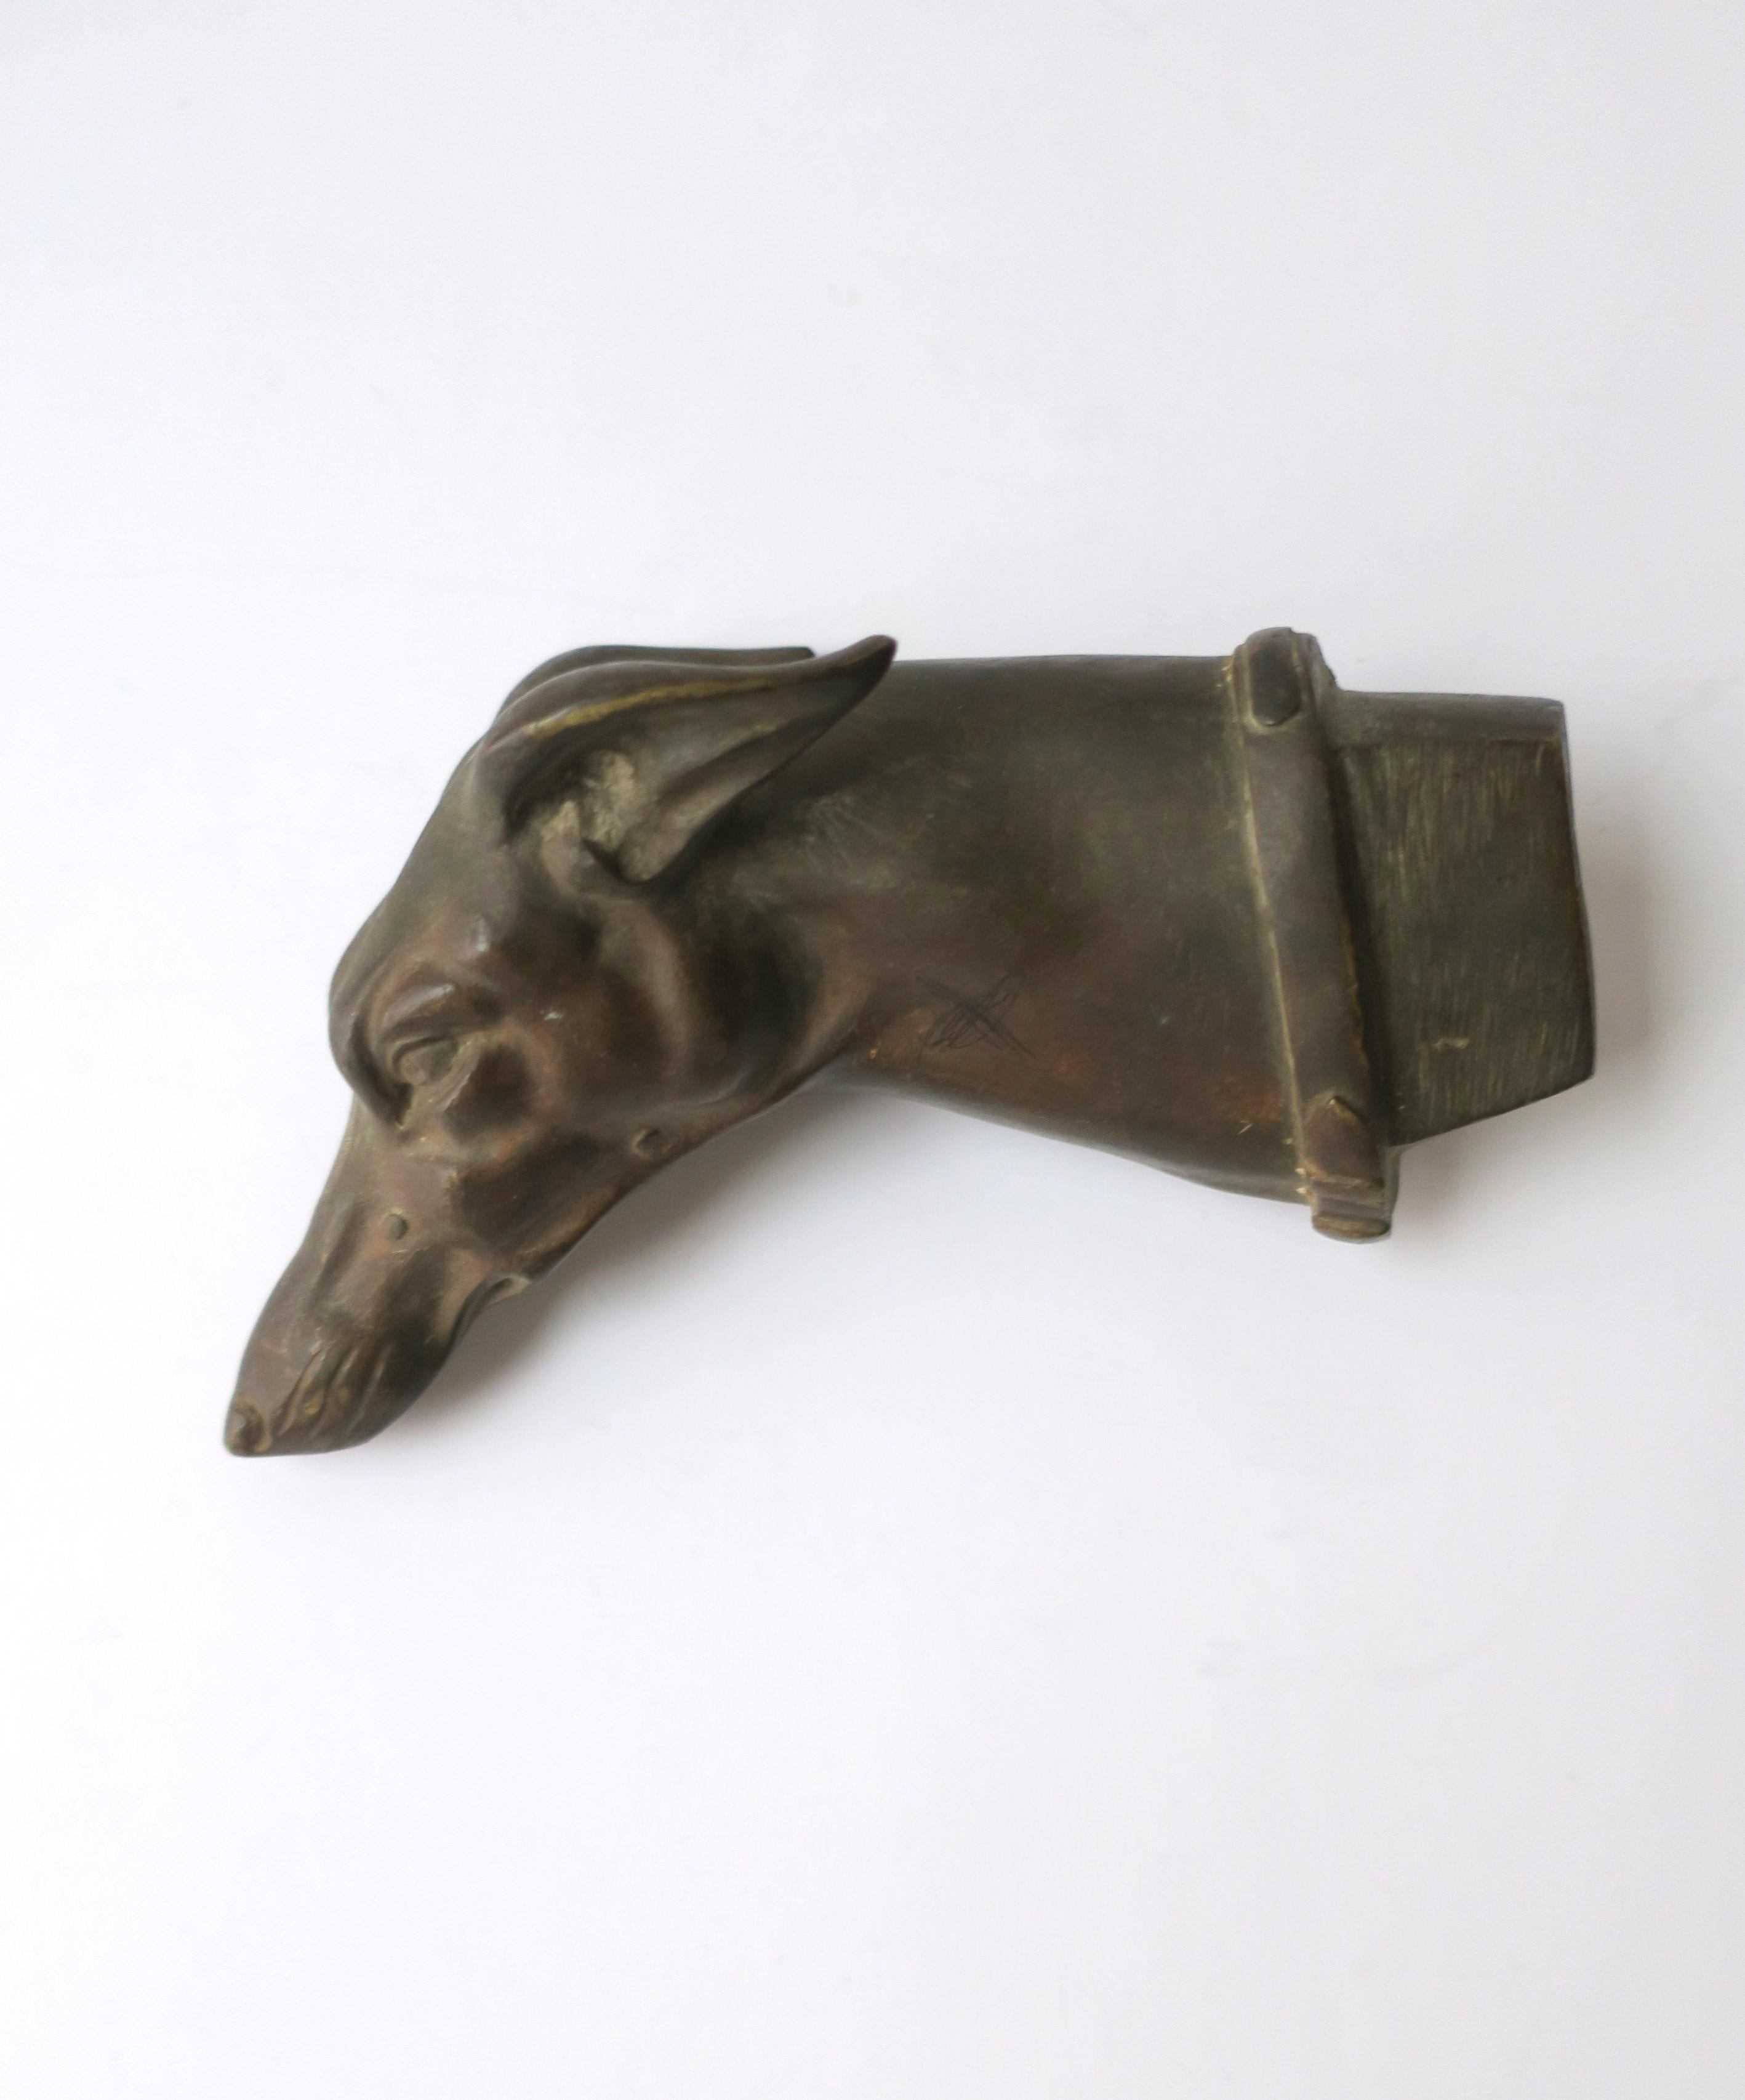 A beautiful and substantial solid bronze dog head of a Greyhound or Whippet, Art Deco period, circa early-20th century, Europe. England or France. This heavy bronze dog has a detailed face (snout, ears, eyes) and collar. A great collectable piece;